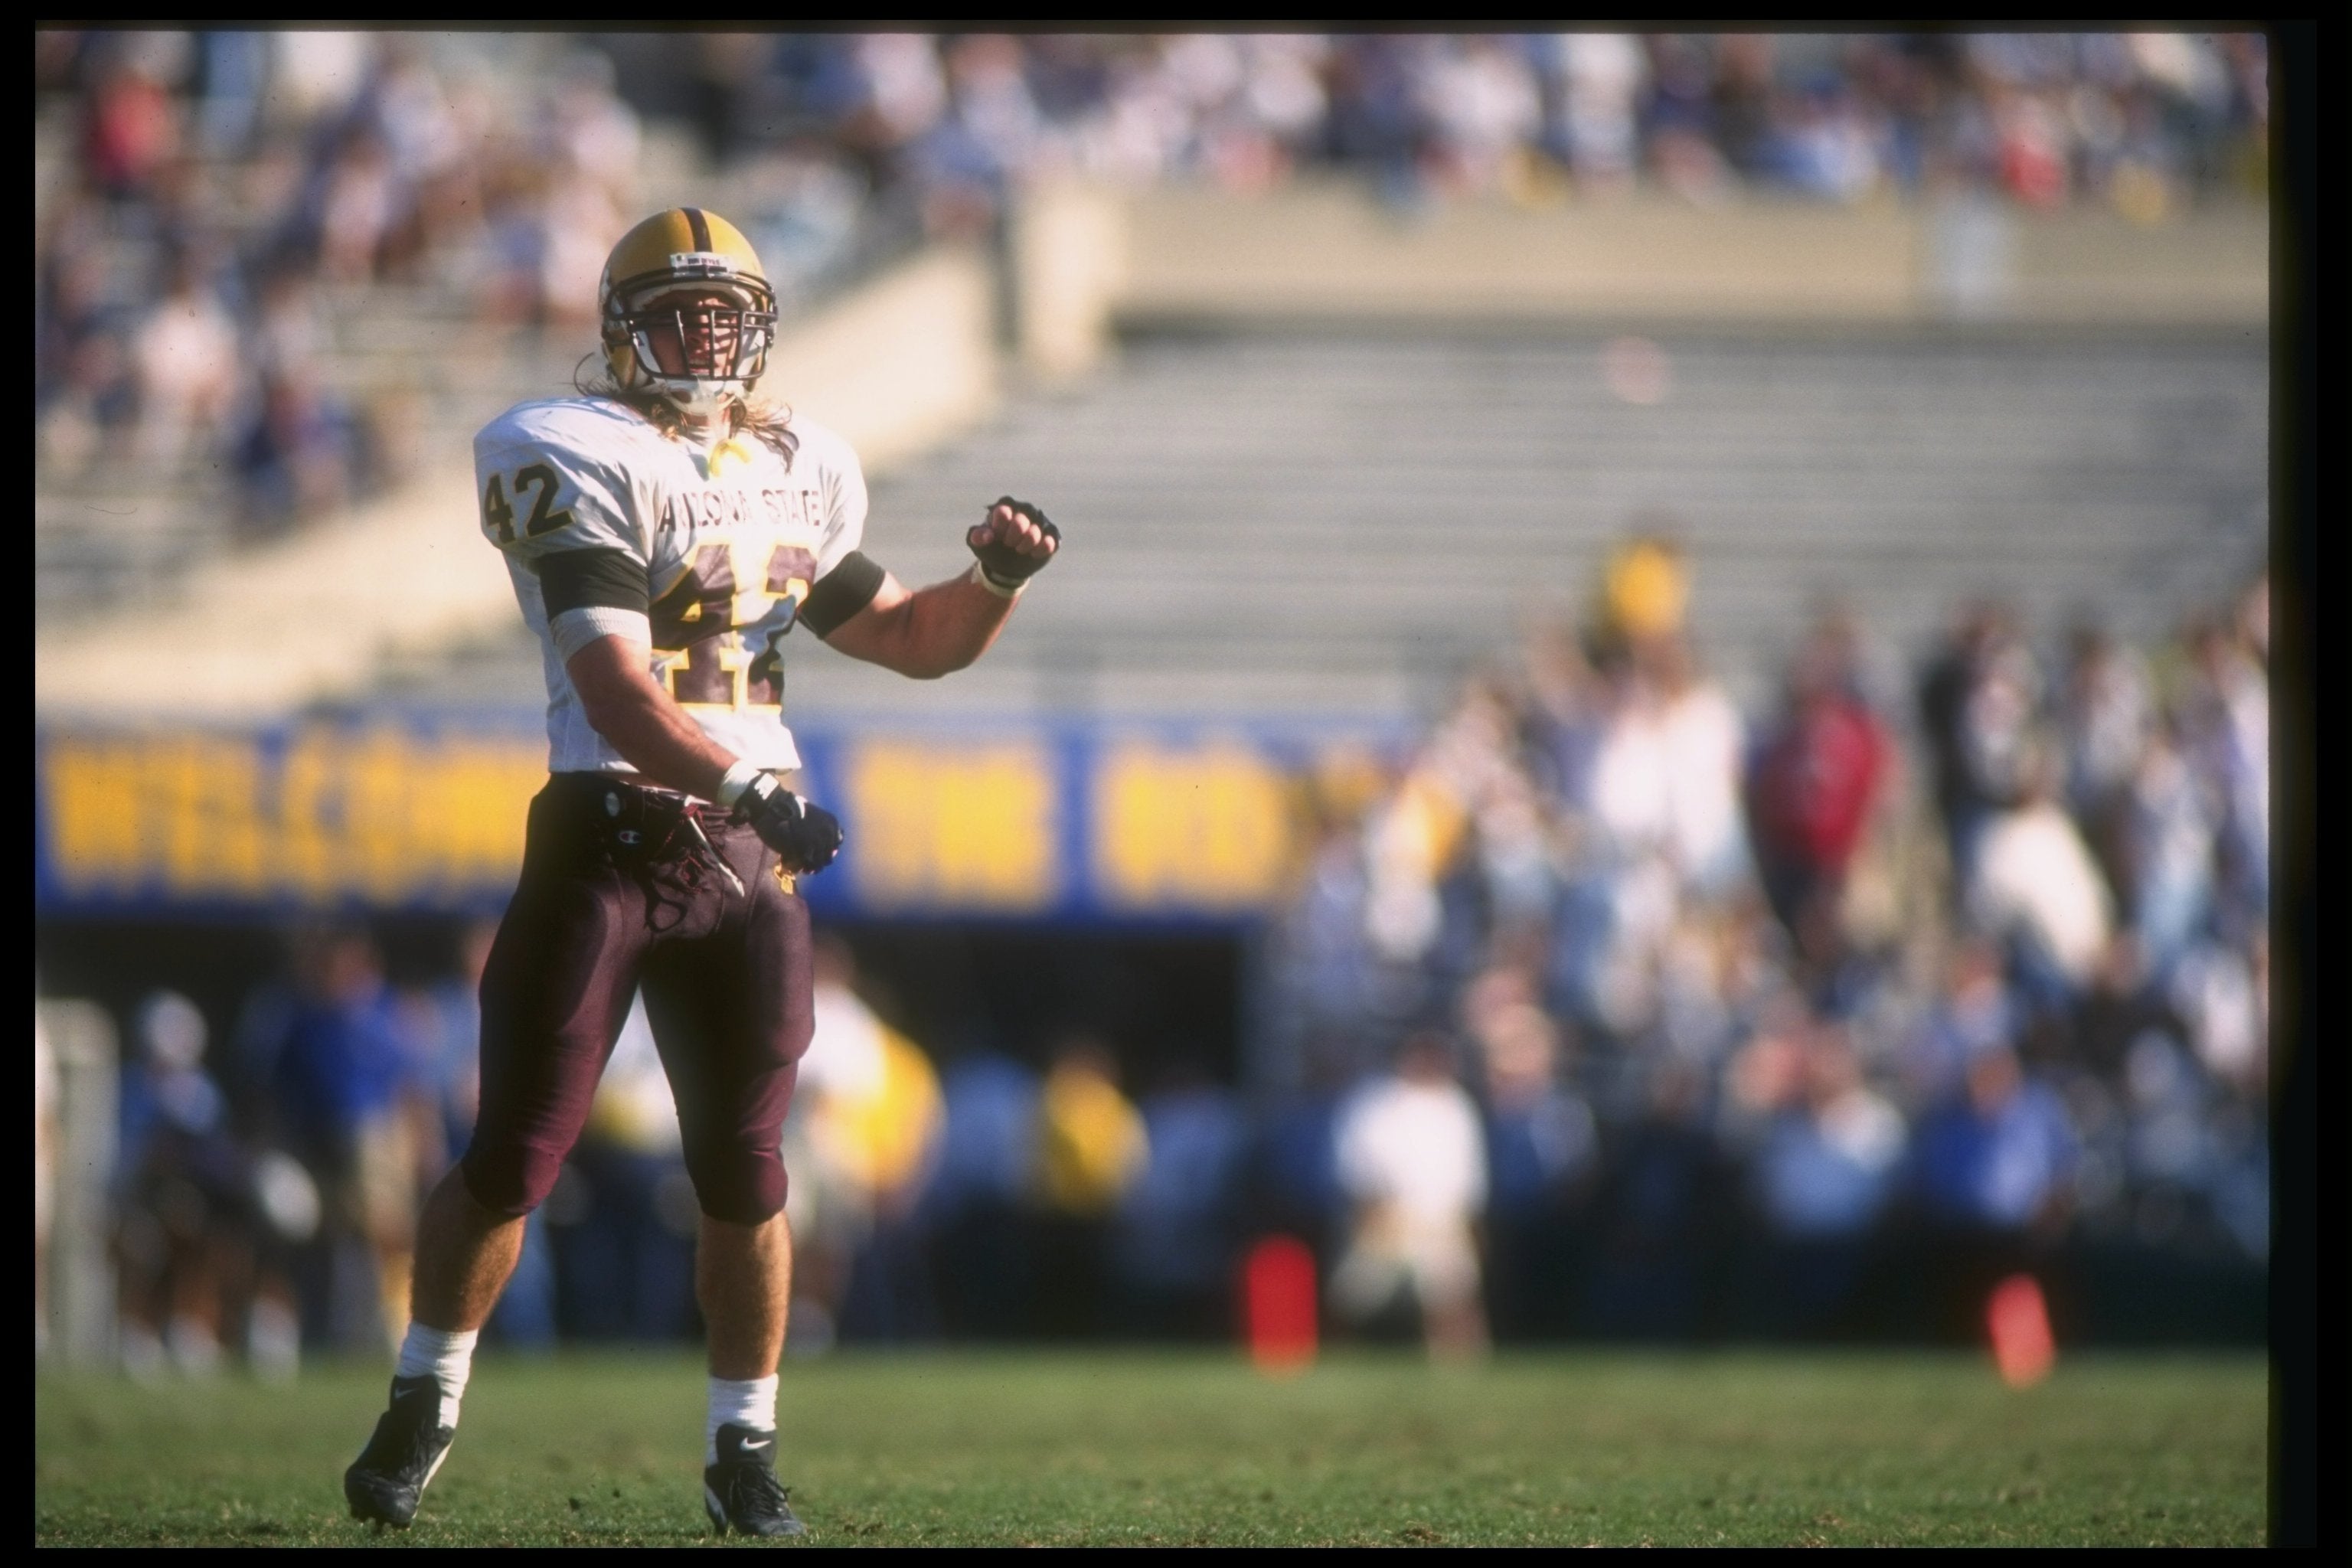 Pat Tillman of the Arizona State Sun Devils celebrates during a game against the UCLA Bruins at the Rose Bowl in Pasadena, California, October 12, 1996.